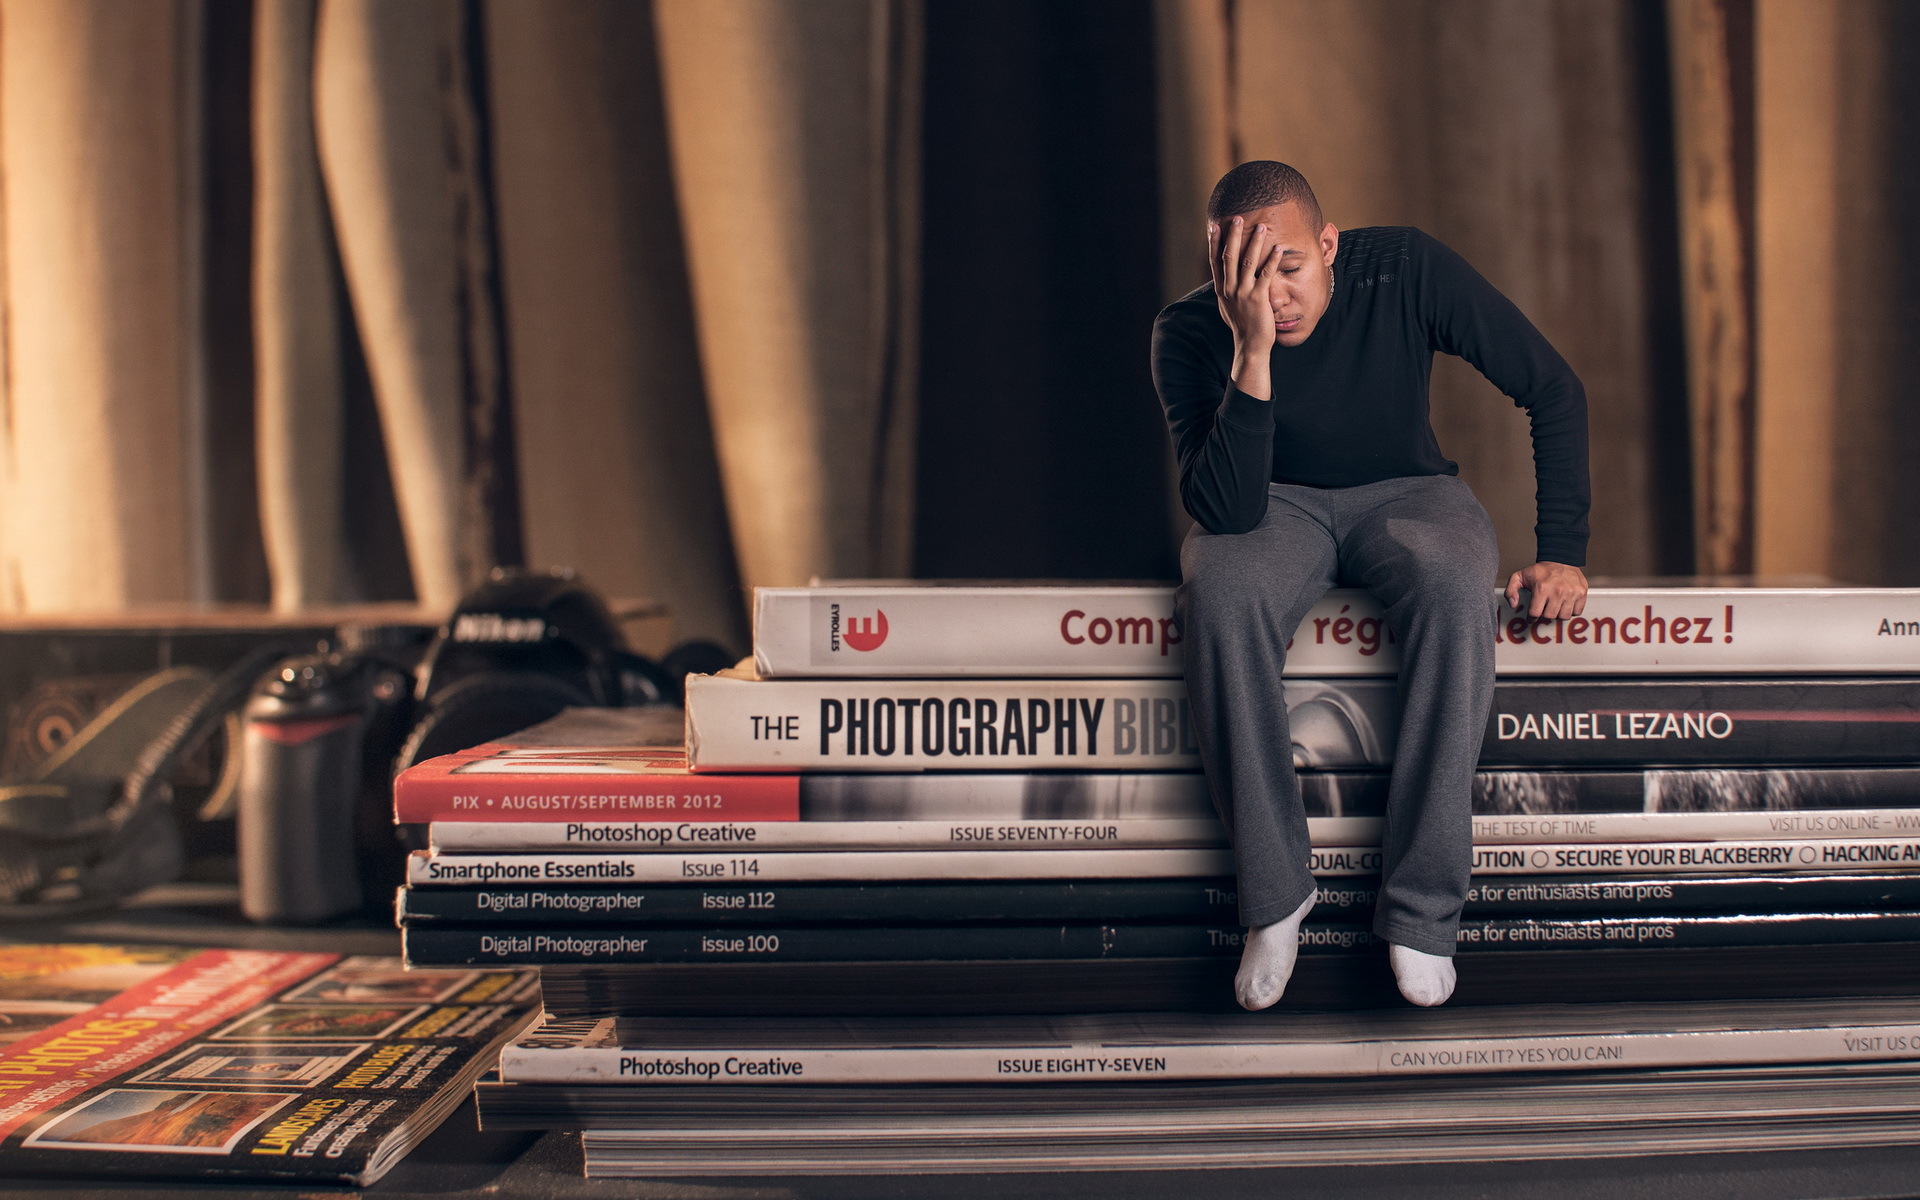 boy, Books, Situation, Photoshop, Photography, Tech, Camera, Men, Males, Mood, Emotion, Cg, Digital, Books, Library, Frustration, Humor, Funny Wallpaper